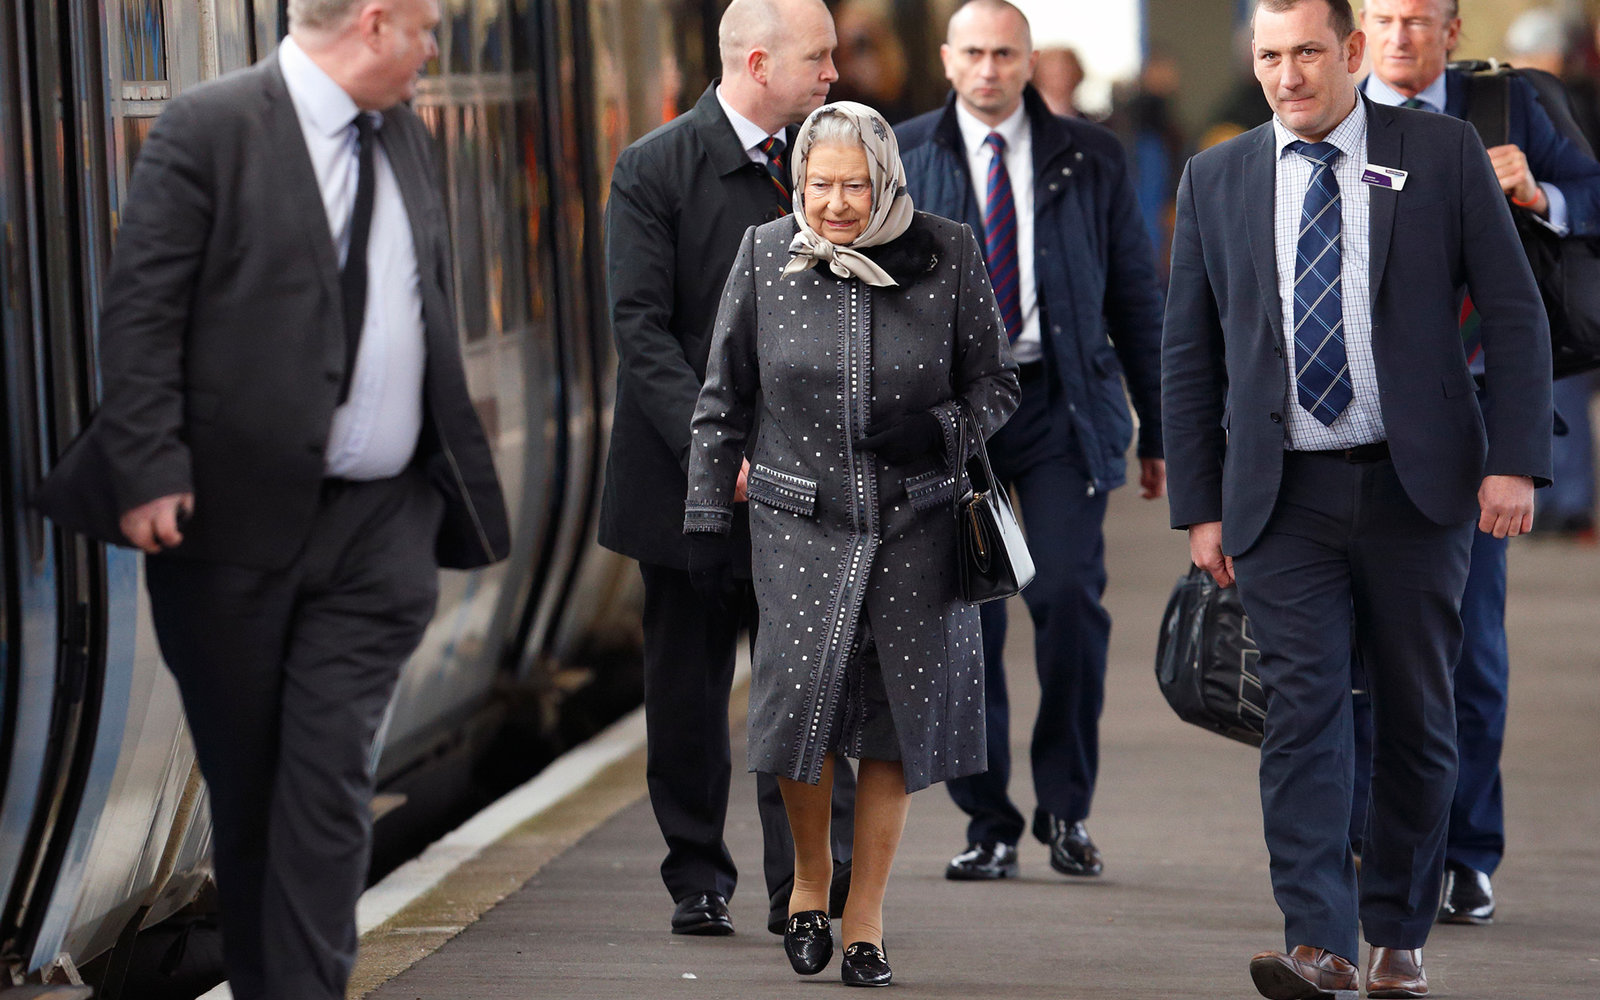 KING'S LYNN, UNITED KINGDOM - FEBRUARY 08: (EMBARGOED FOR PUBLICATION IN UK NEWSPAPERS UNTIL 48 HOURS AFTER CREATE DATE AND TIME) Queen Elizabeth II boards a train at King's Lynn Station to return to London after her Christmas break at Sandringham House o